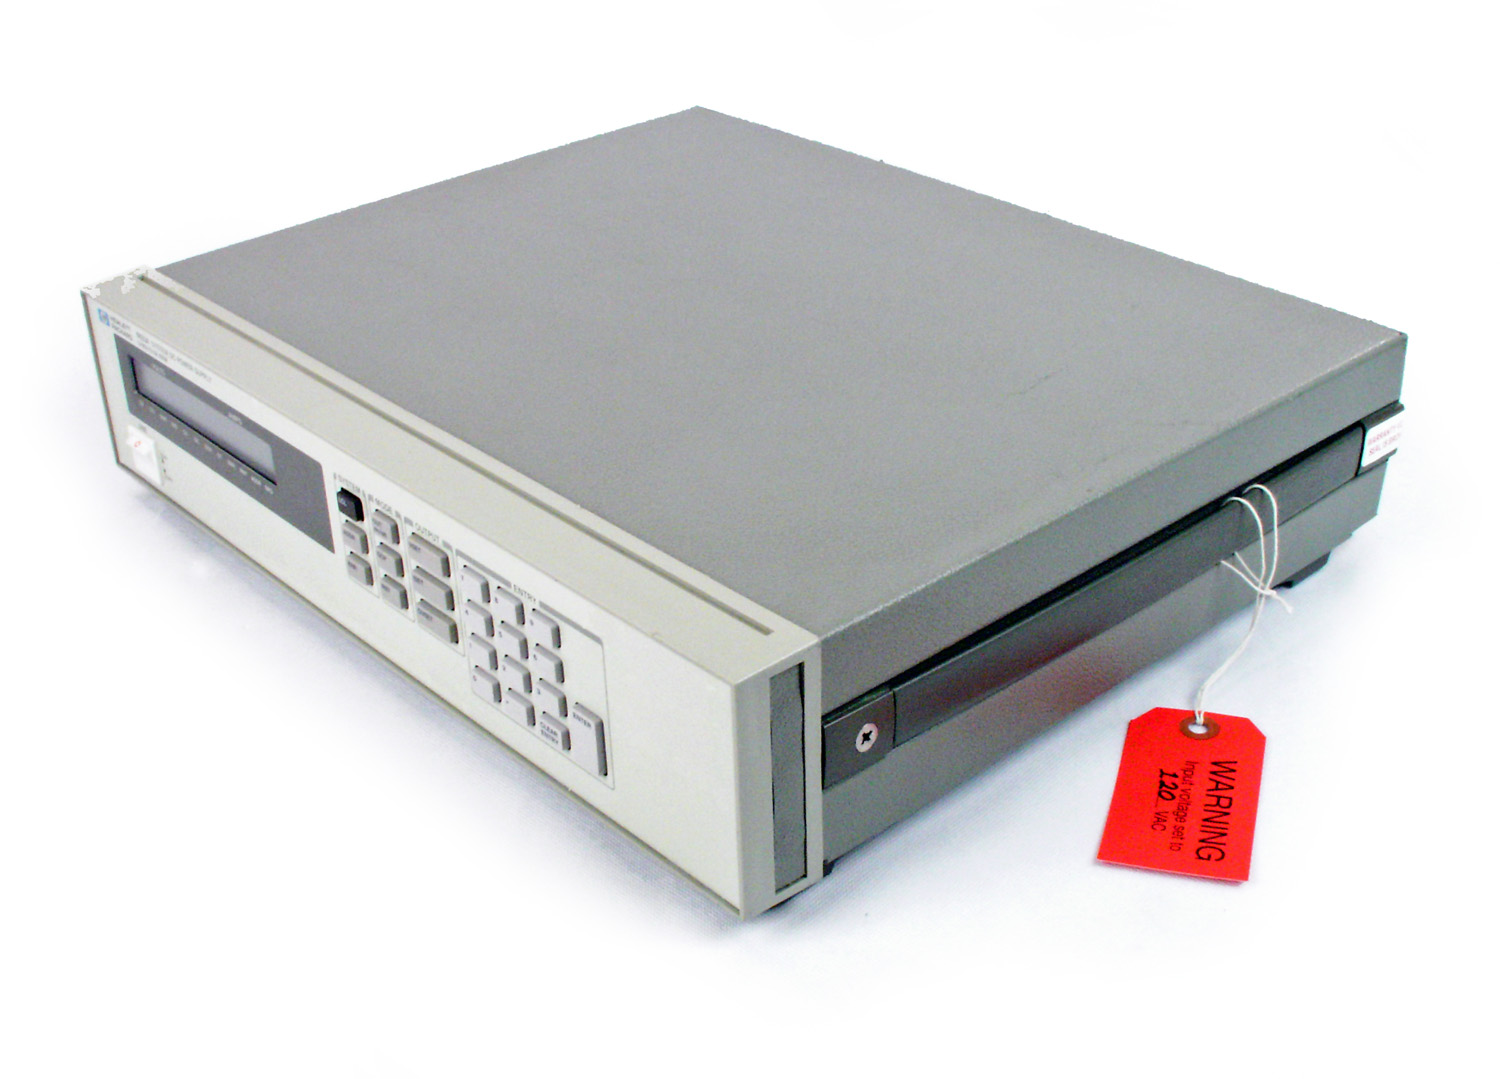 Agilent / HP 6633A for sale